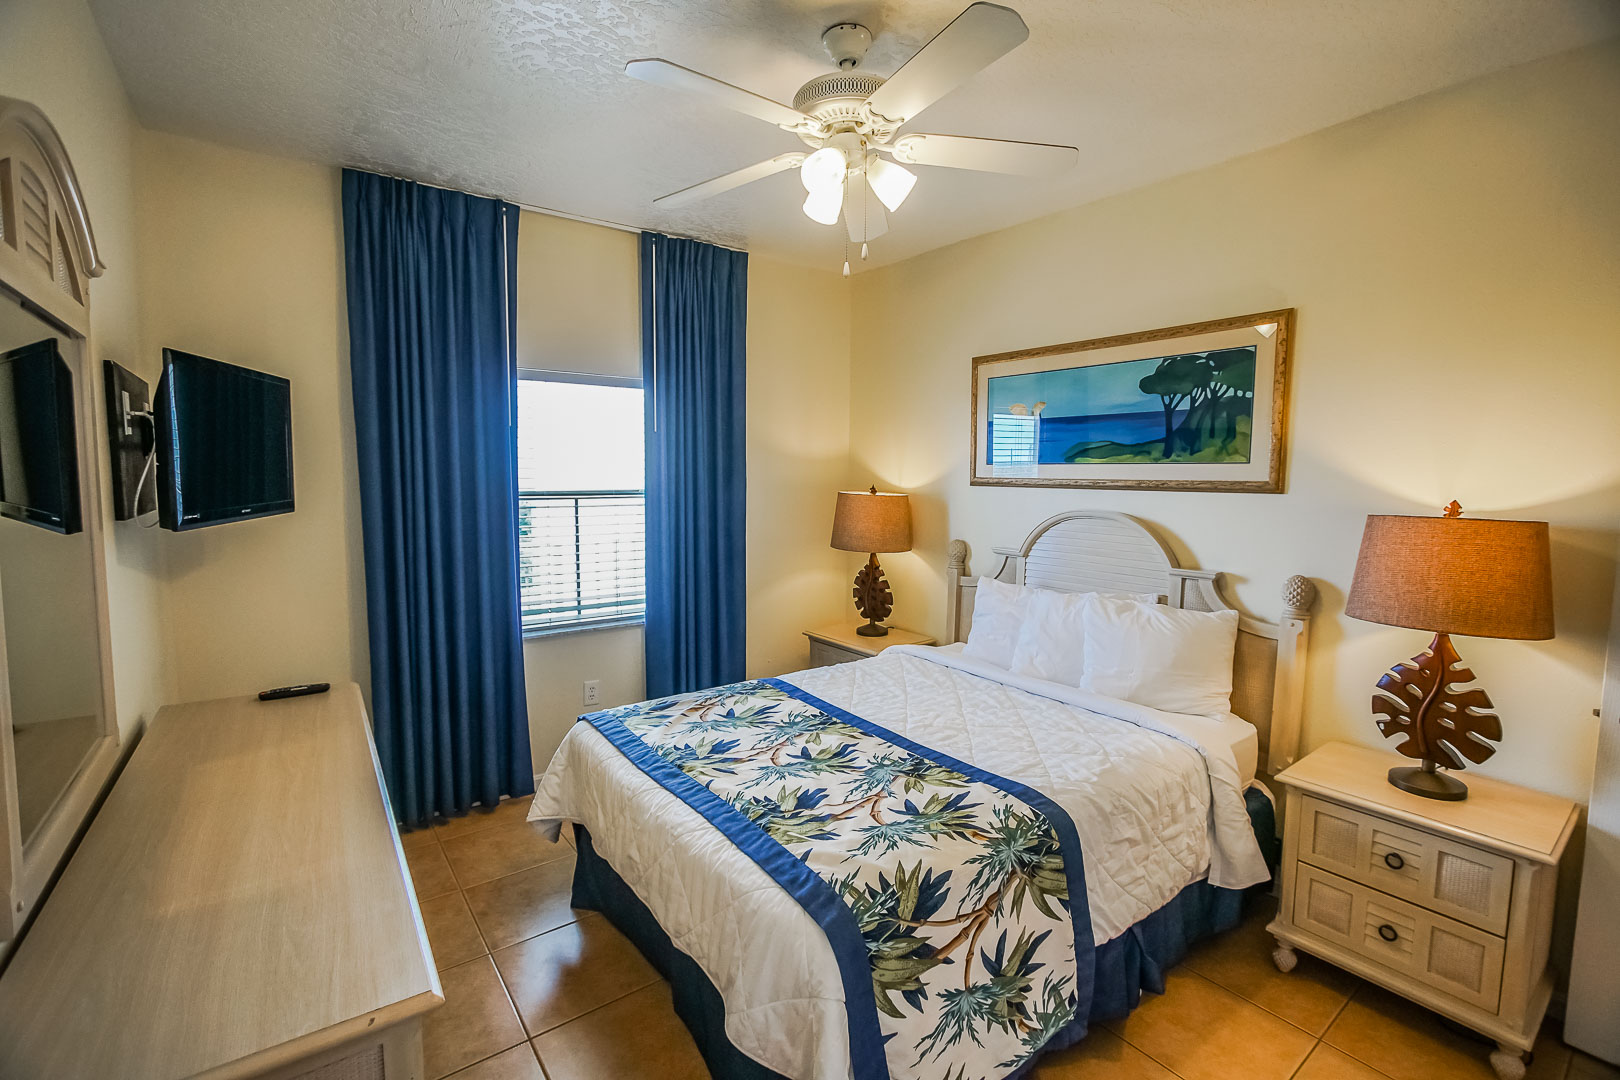 A vibrant master bedroom at VRI's Discovery Beach Resort in Cocoa Beach, Florida.